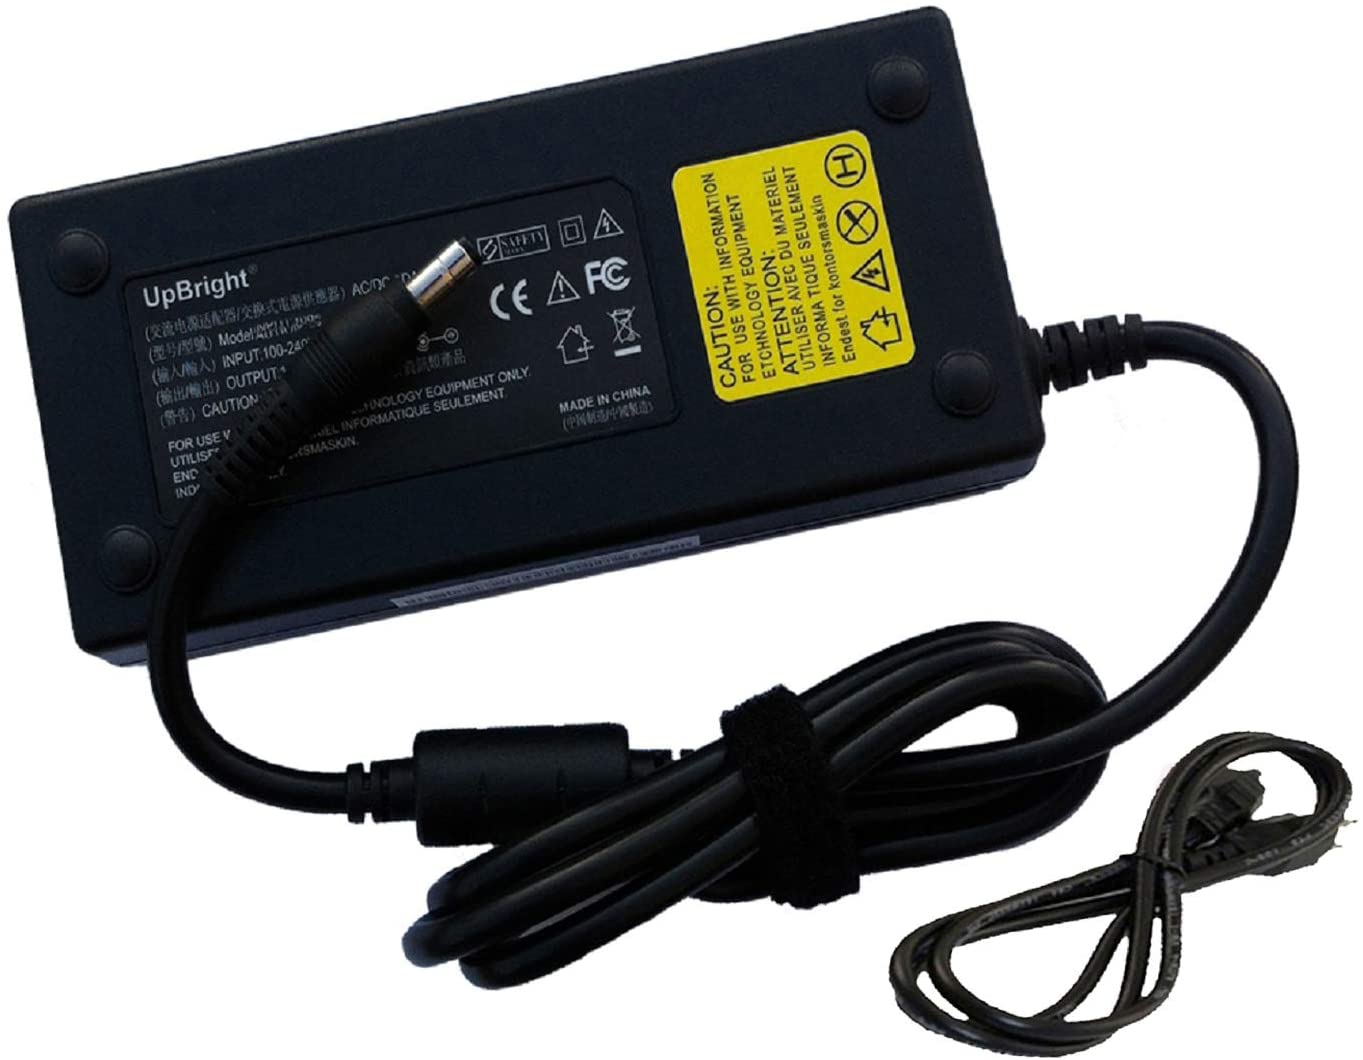 UPBRIGHT NEW Global AC / DC Adapter For QNAP TS-453A-4G-US TS-453A-8G-US Trubo NAS TS-453A TS453A NAS Server Power Supply Cord Cable PS Charger PSU - image 1 of 5